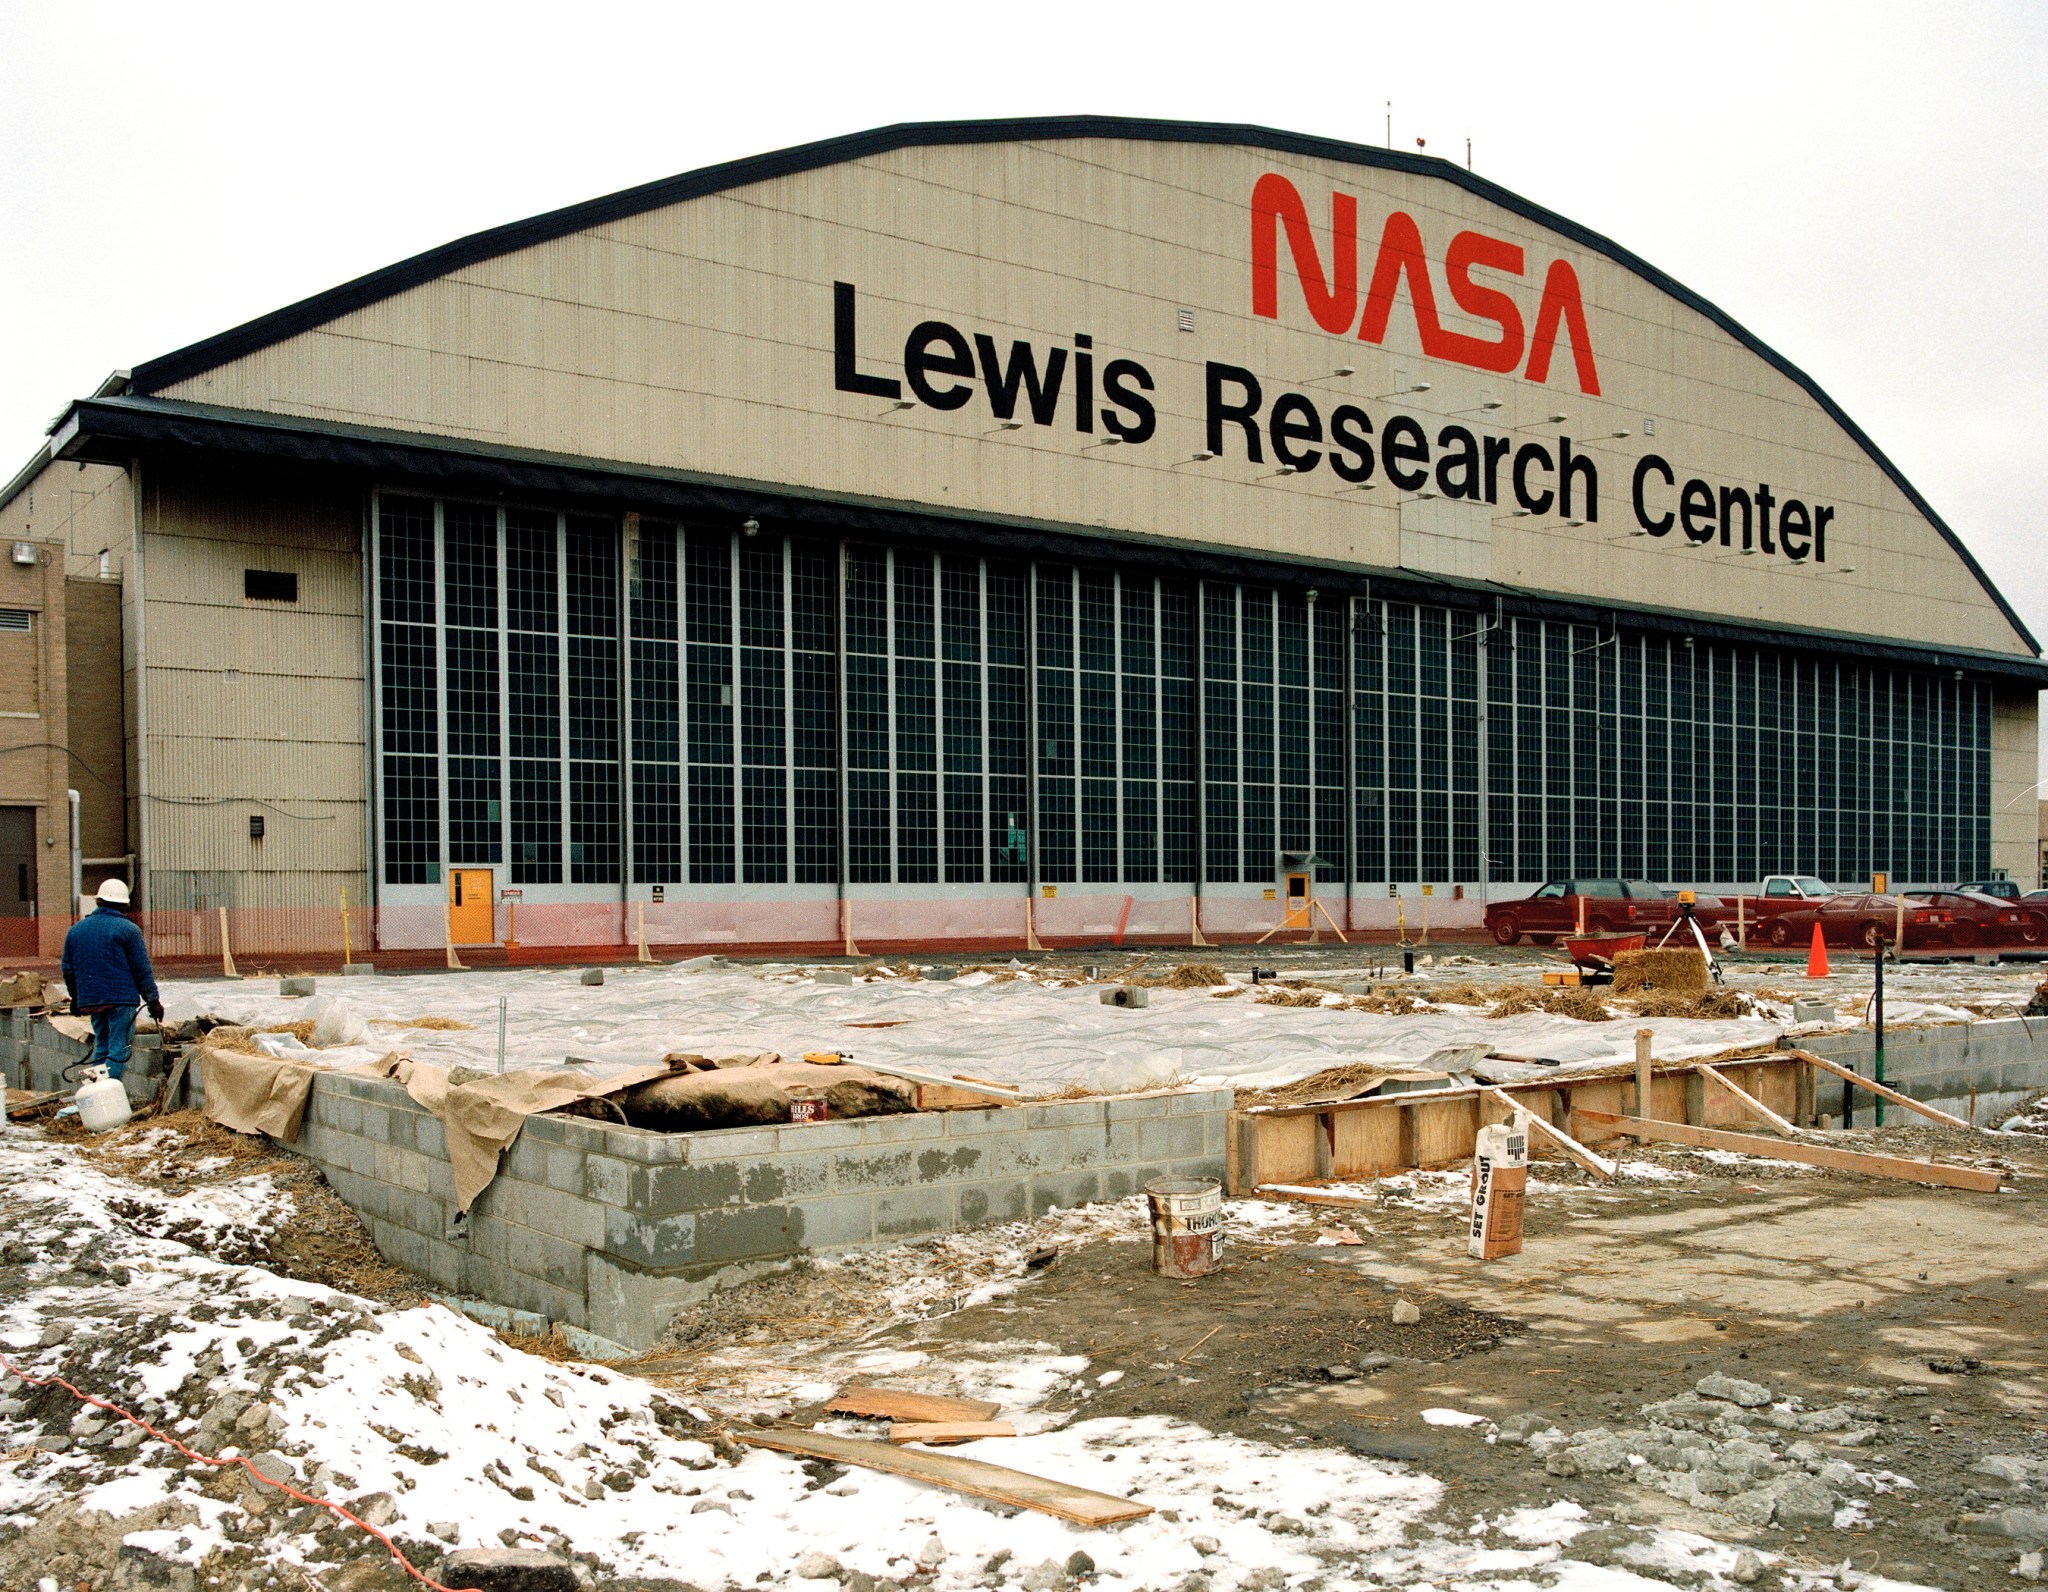 The front of the hangar at NASA's Glenn Research Center. A sign above the hangar includes a small NASA meatball insignia and large text that says, "Glenn Research Center, Lewis Field." Trees and a road are in the foreground.